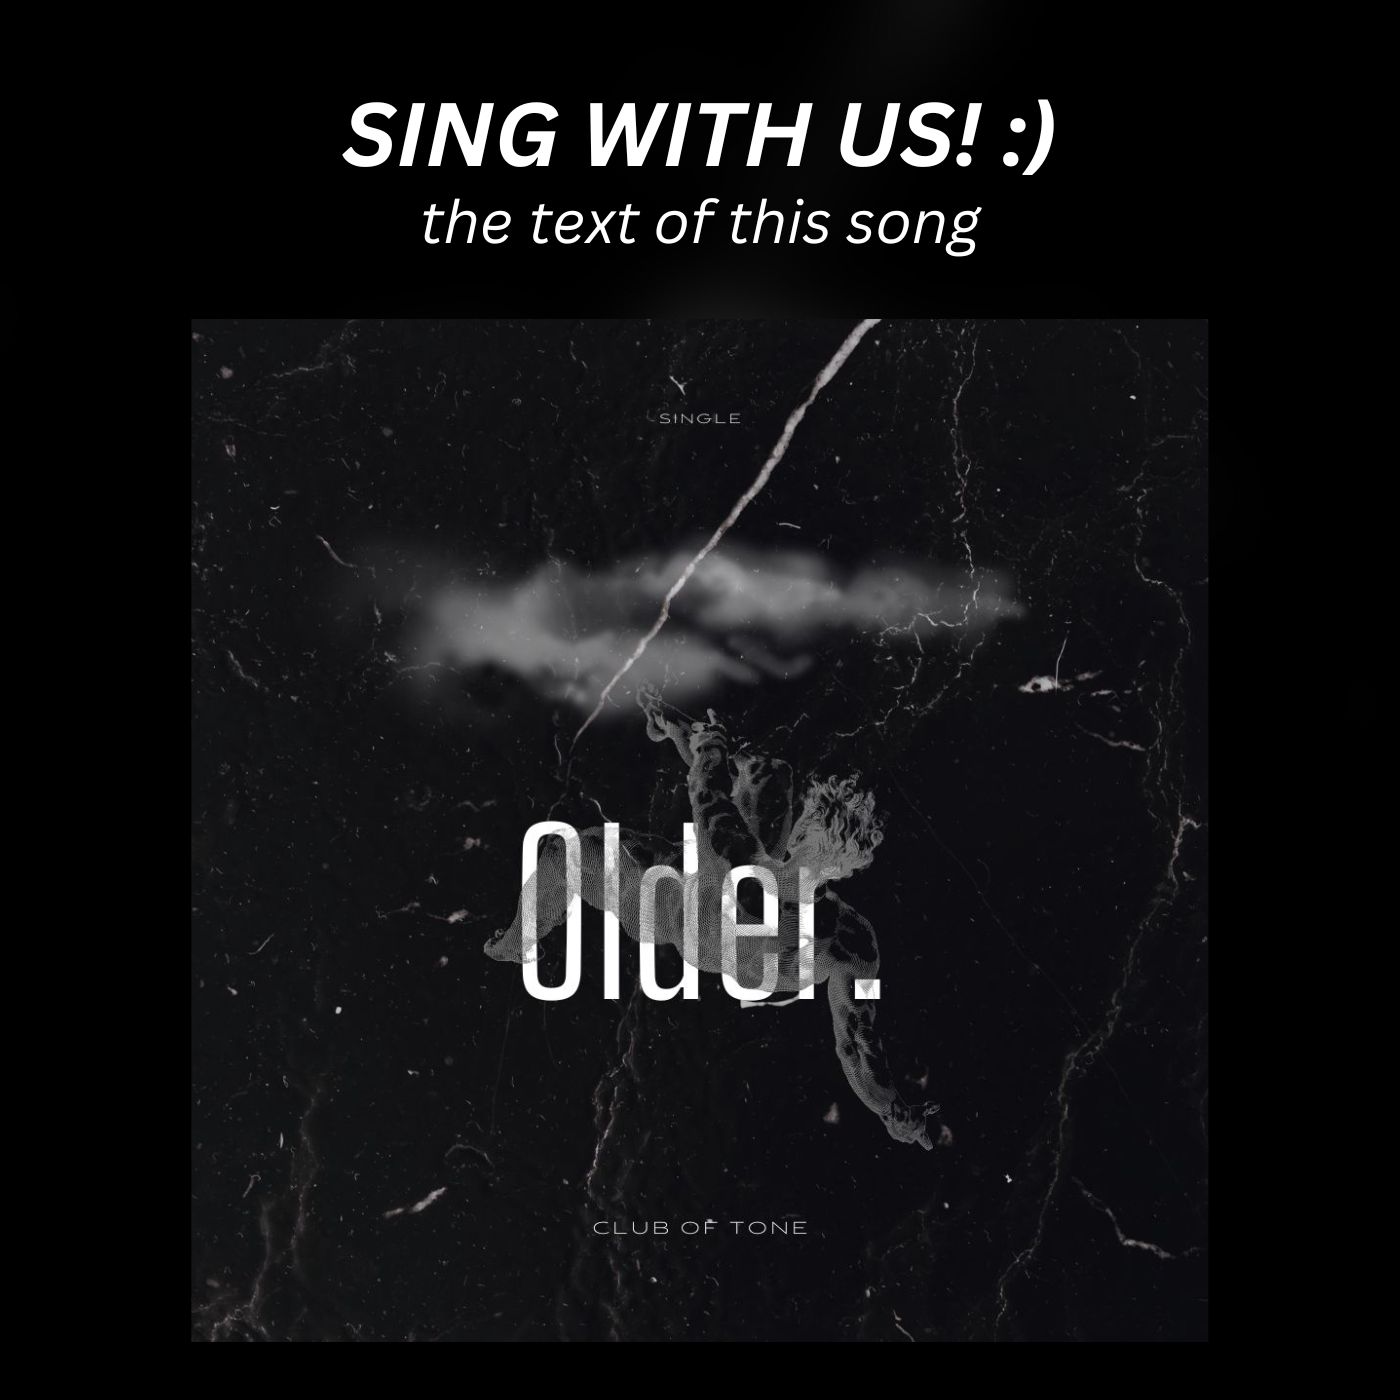 Sing with us: OLDER. by Club of Tone